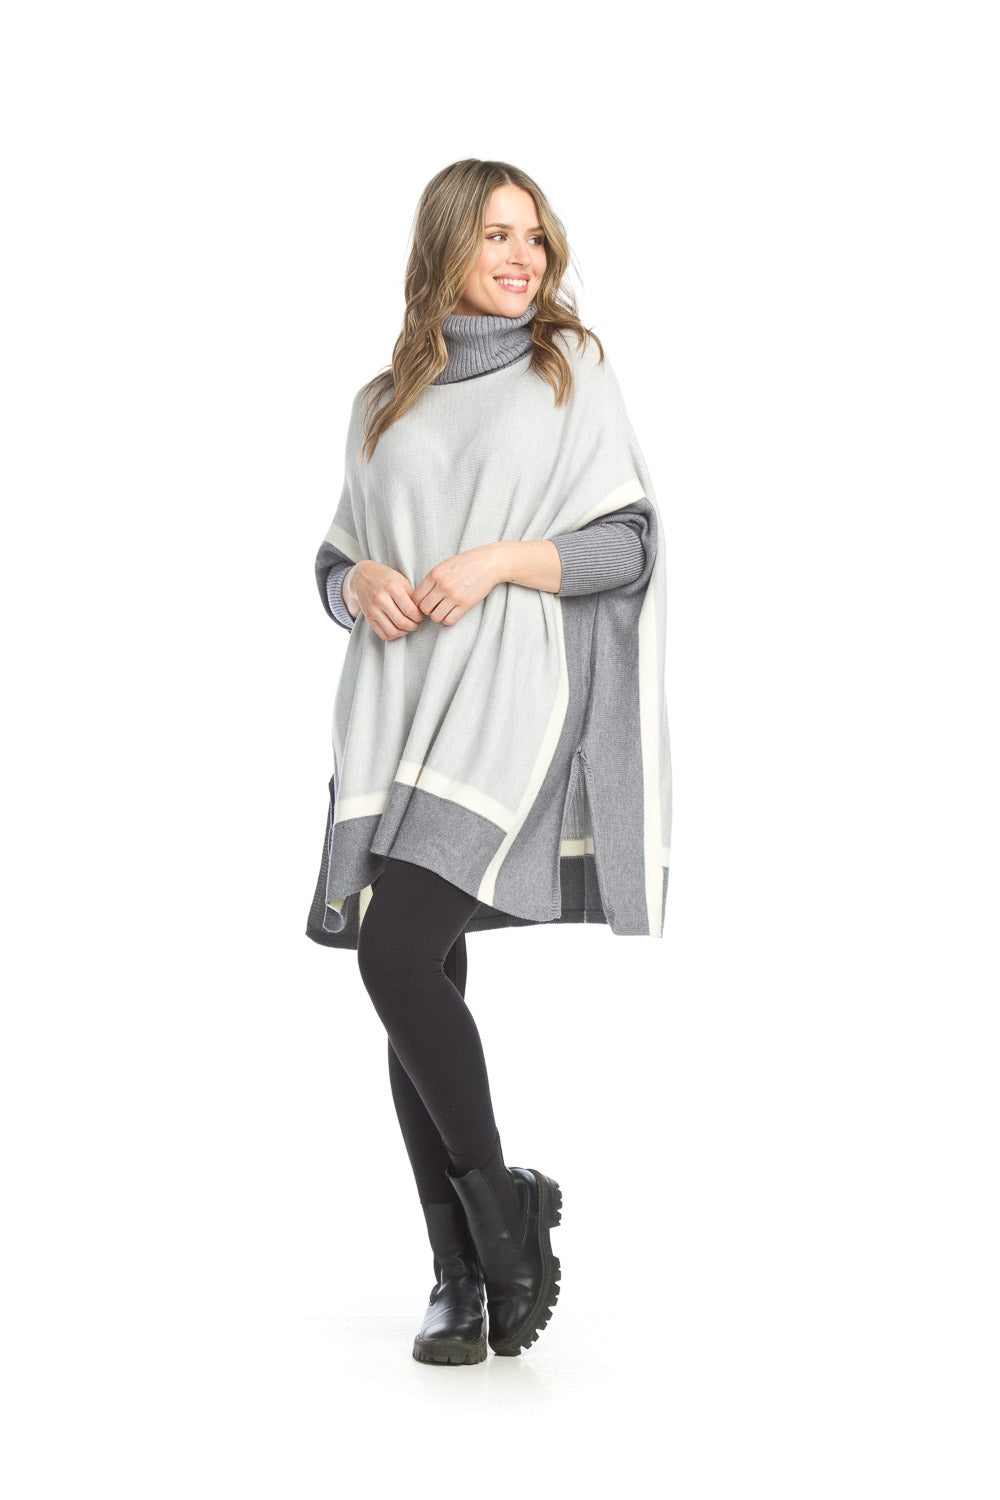 ST-15254 - Cowl Neck Sleeved Poncho